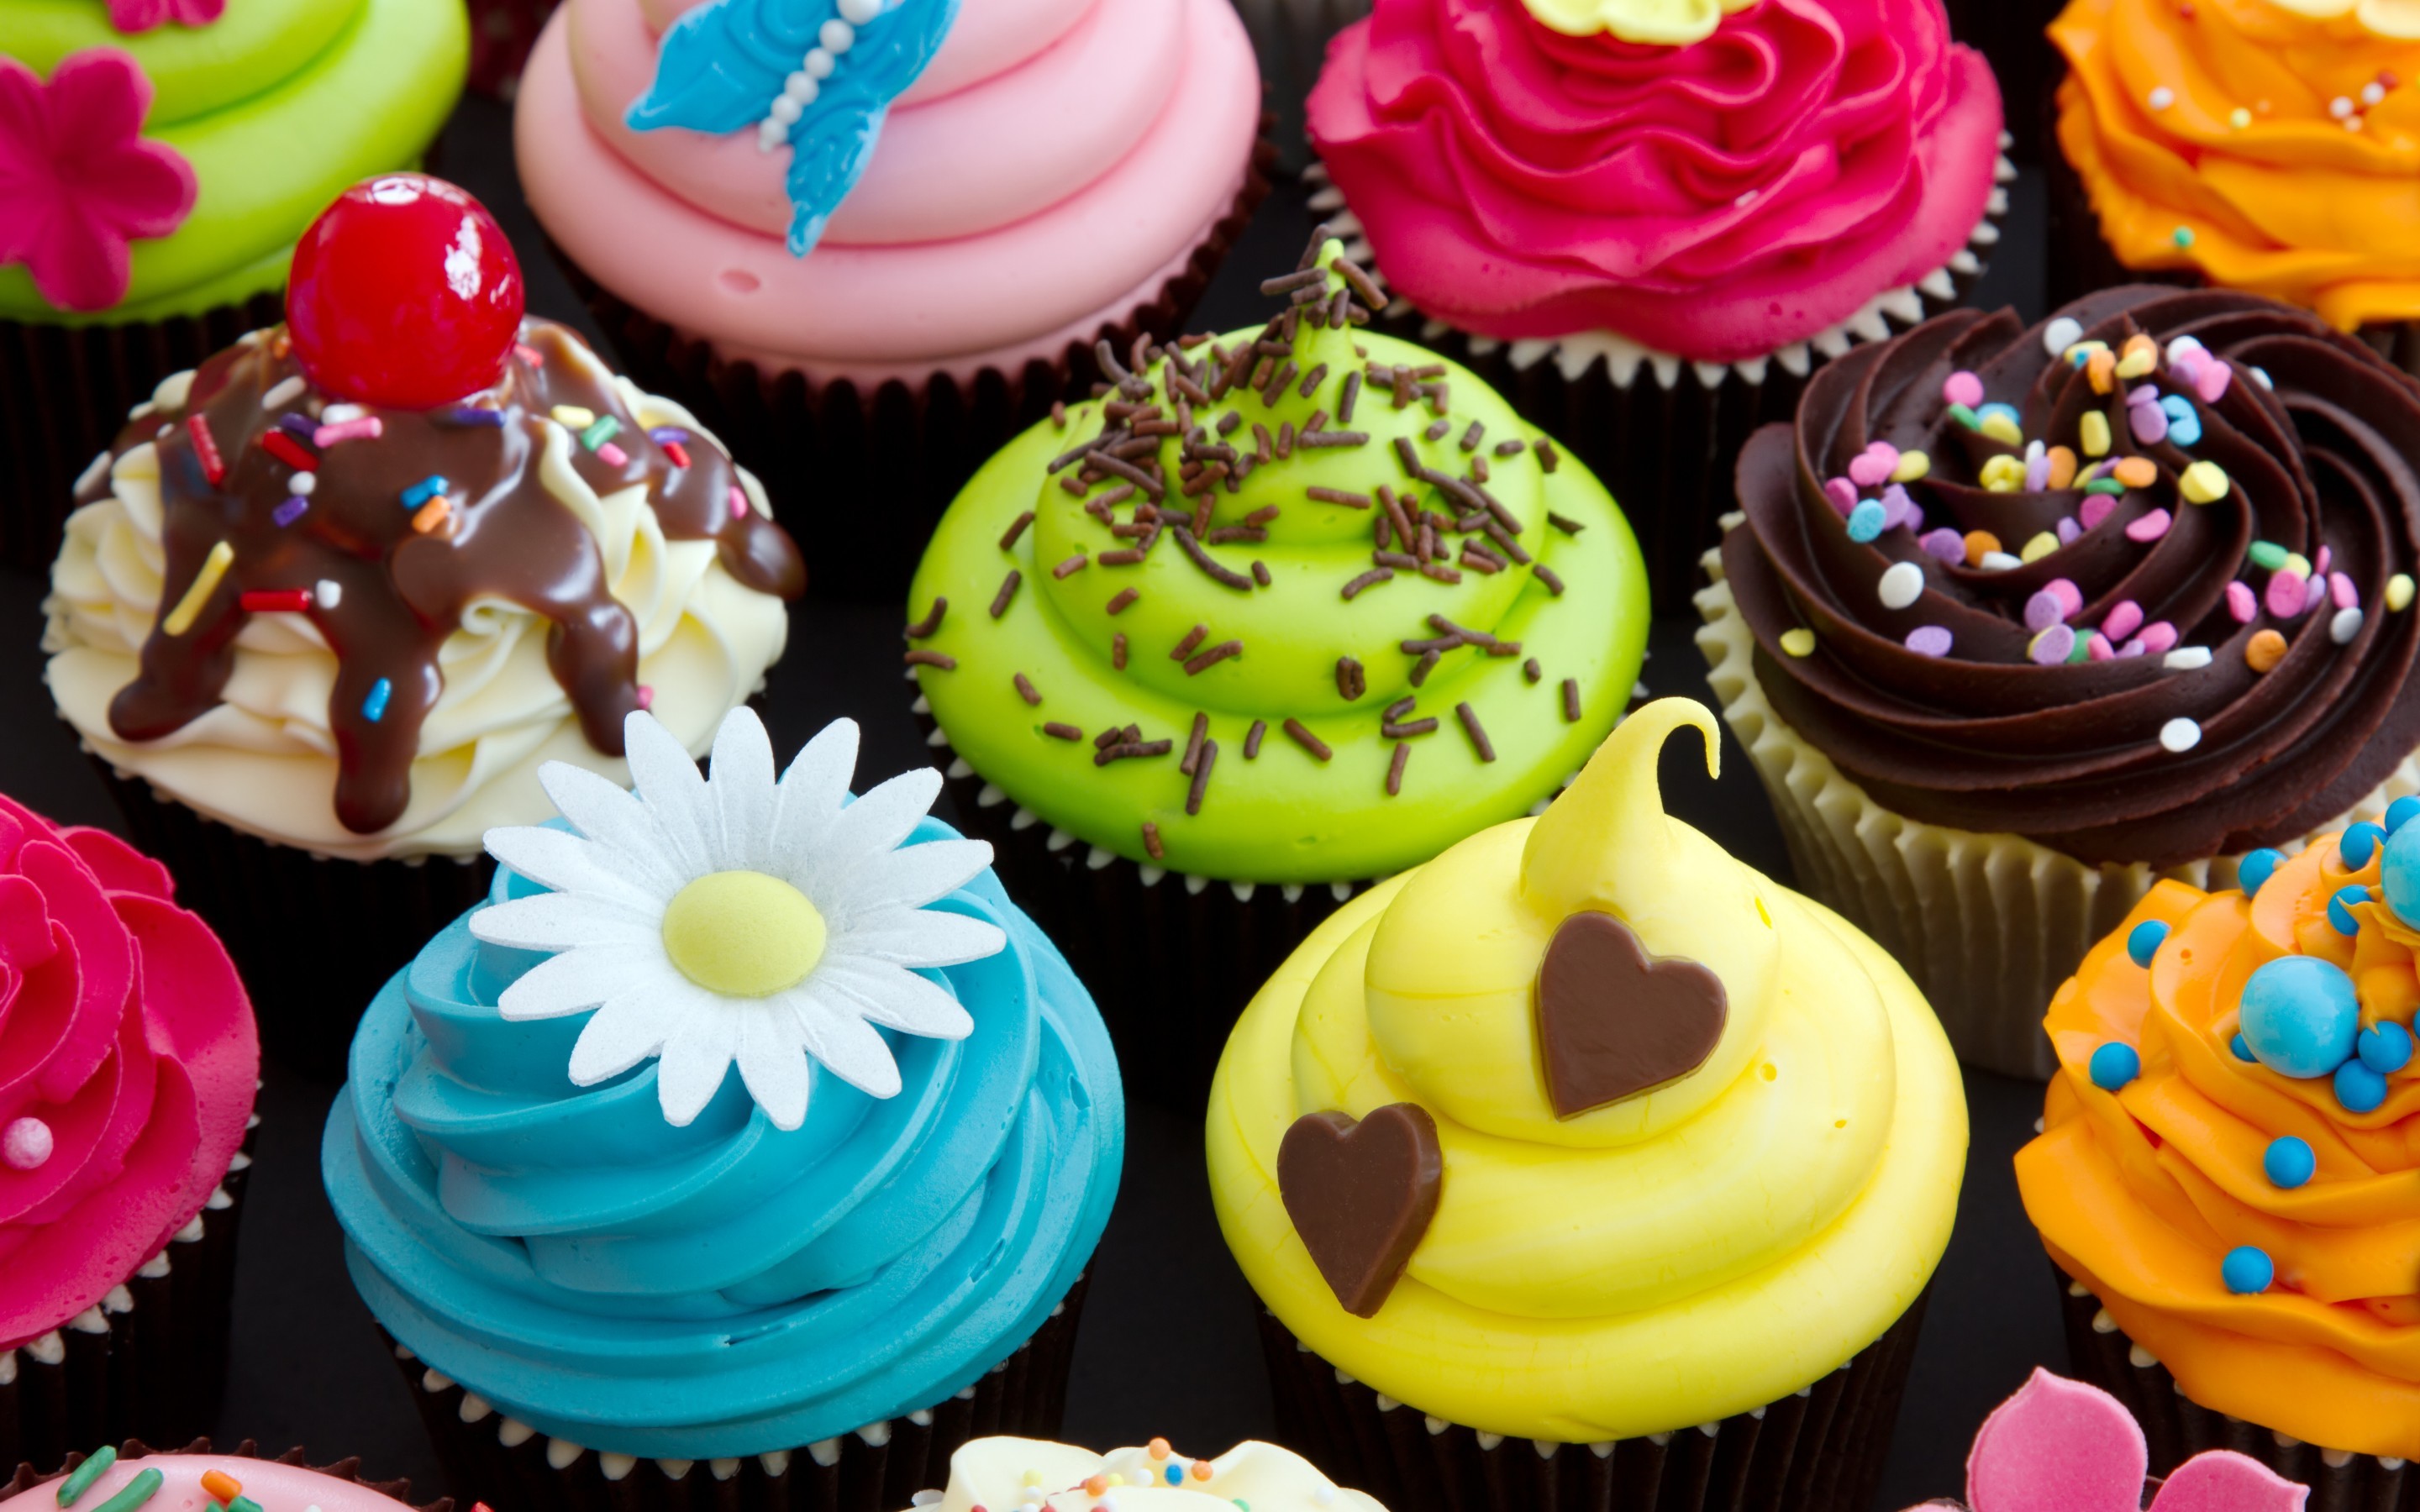 2880x1800 183 Cupcake HD Wallpapers | Backgrounds